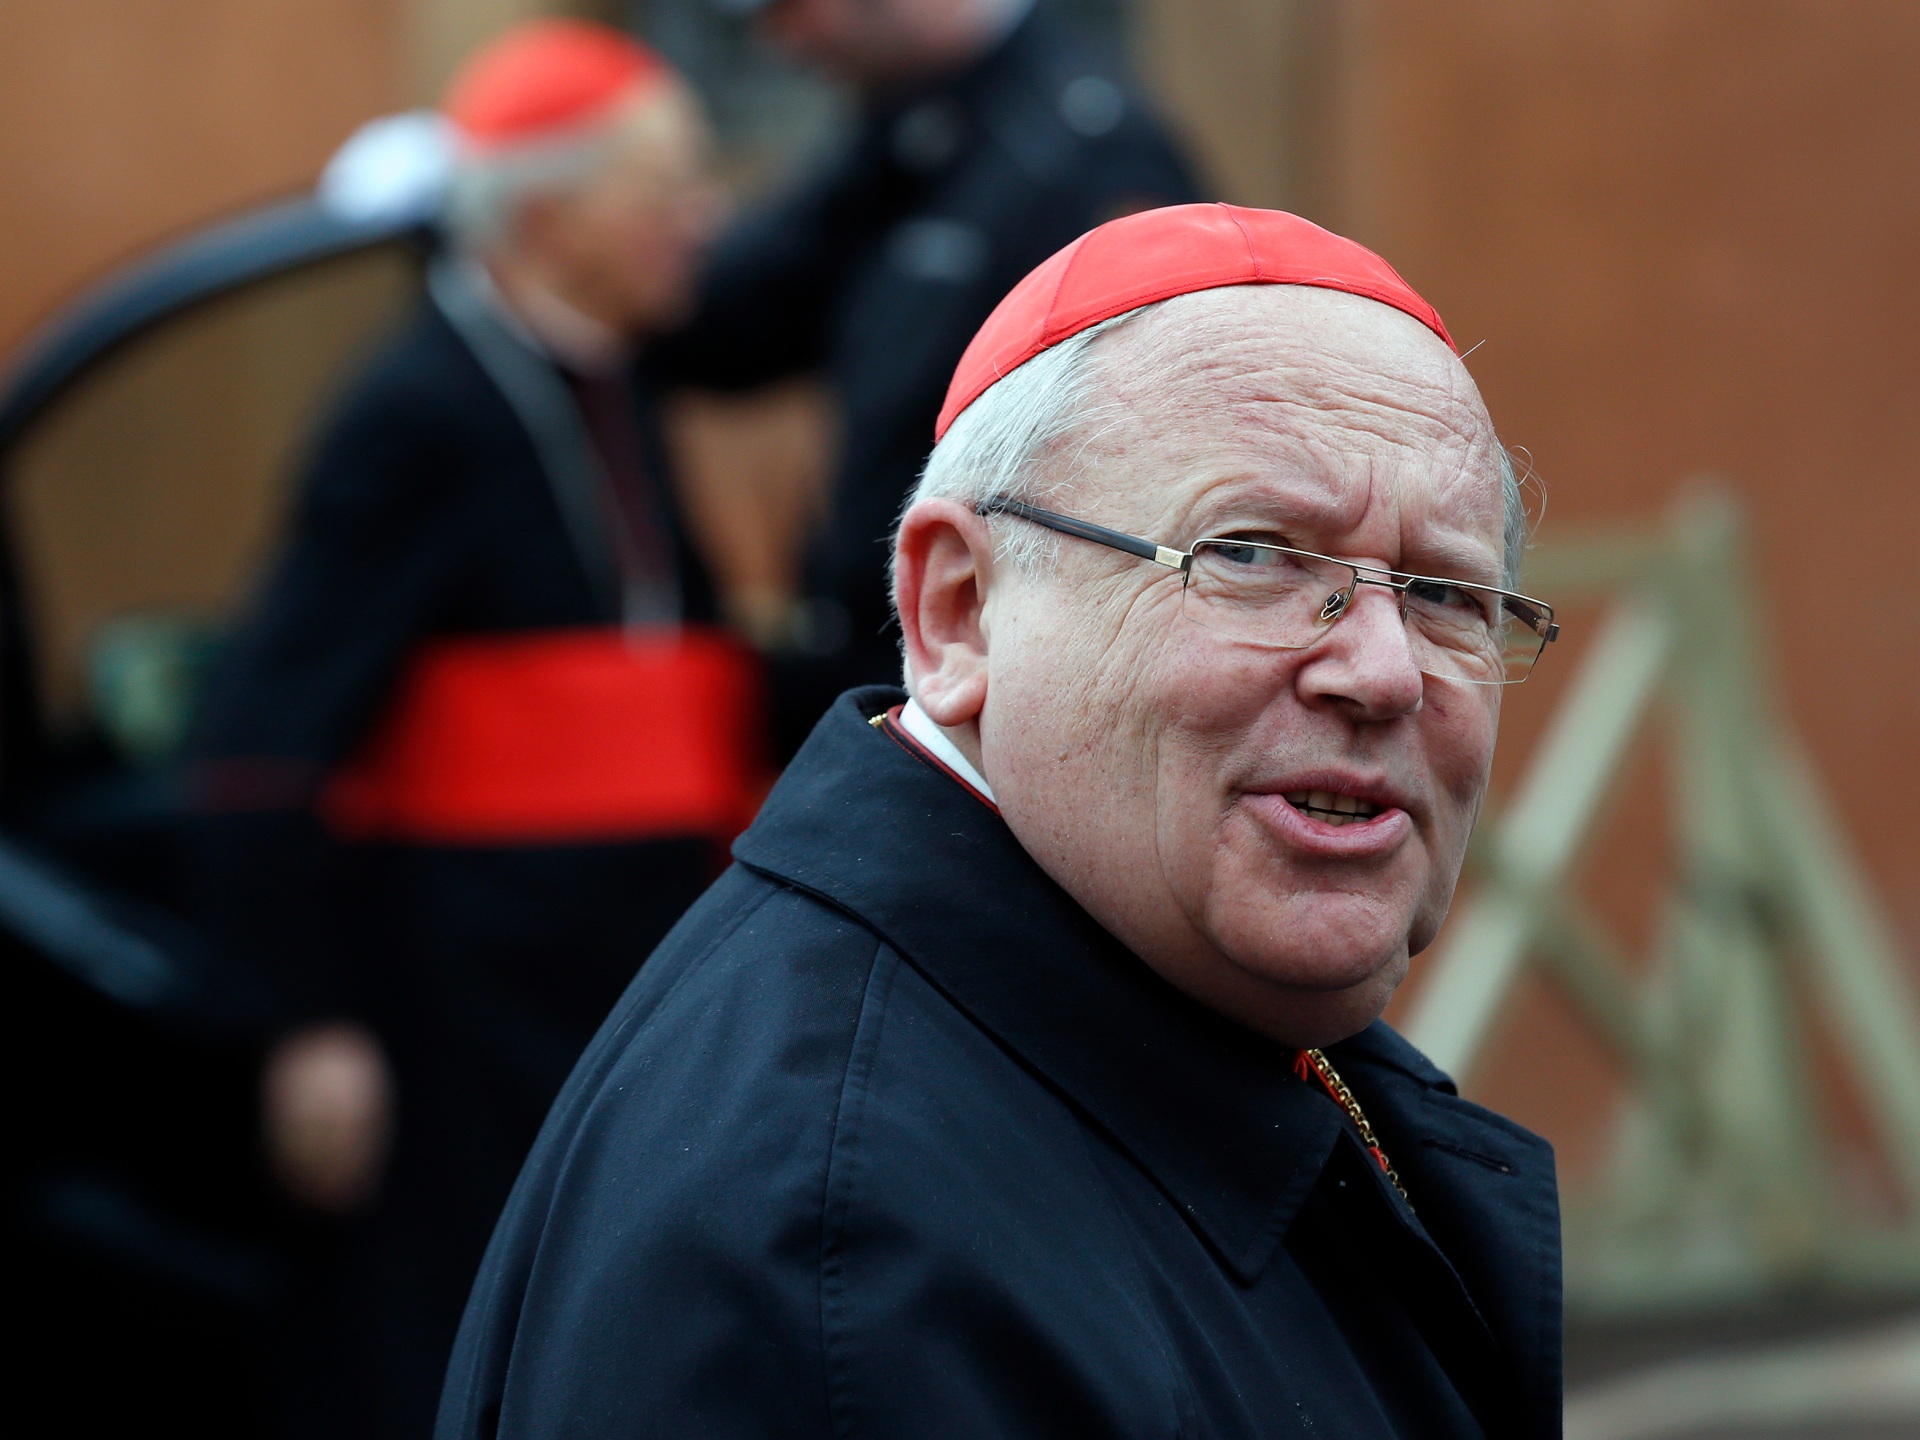 France opens inquiry into cardinal’s confession of child abuse